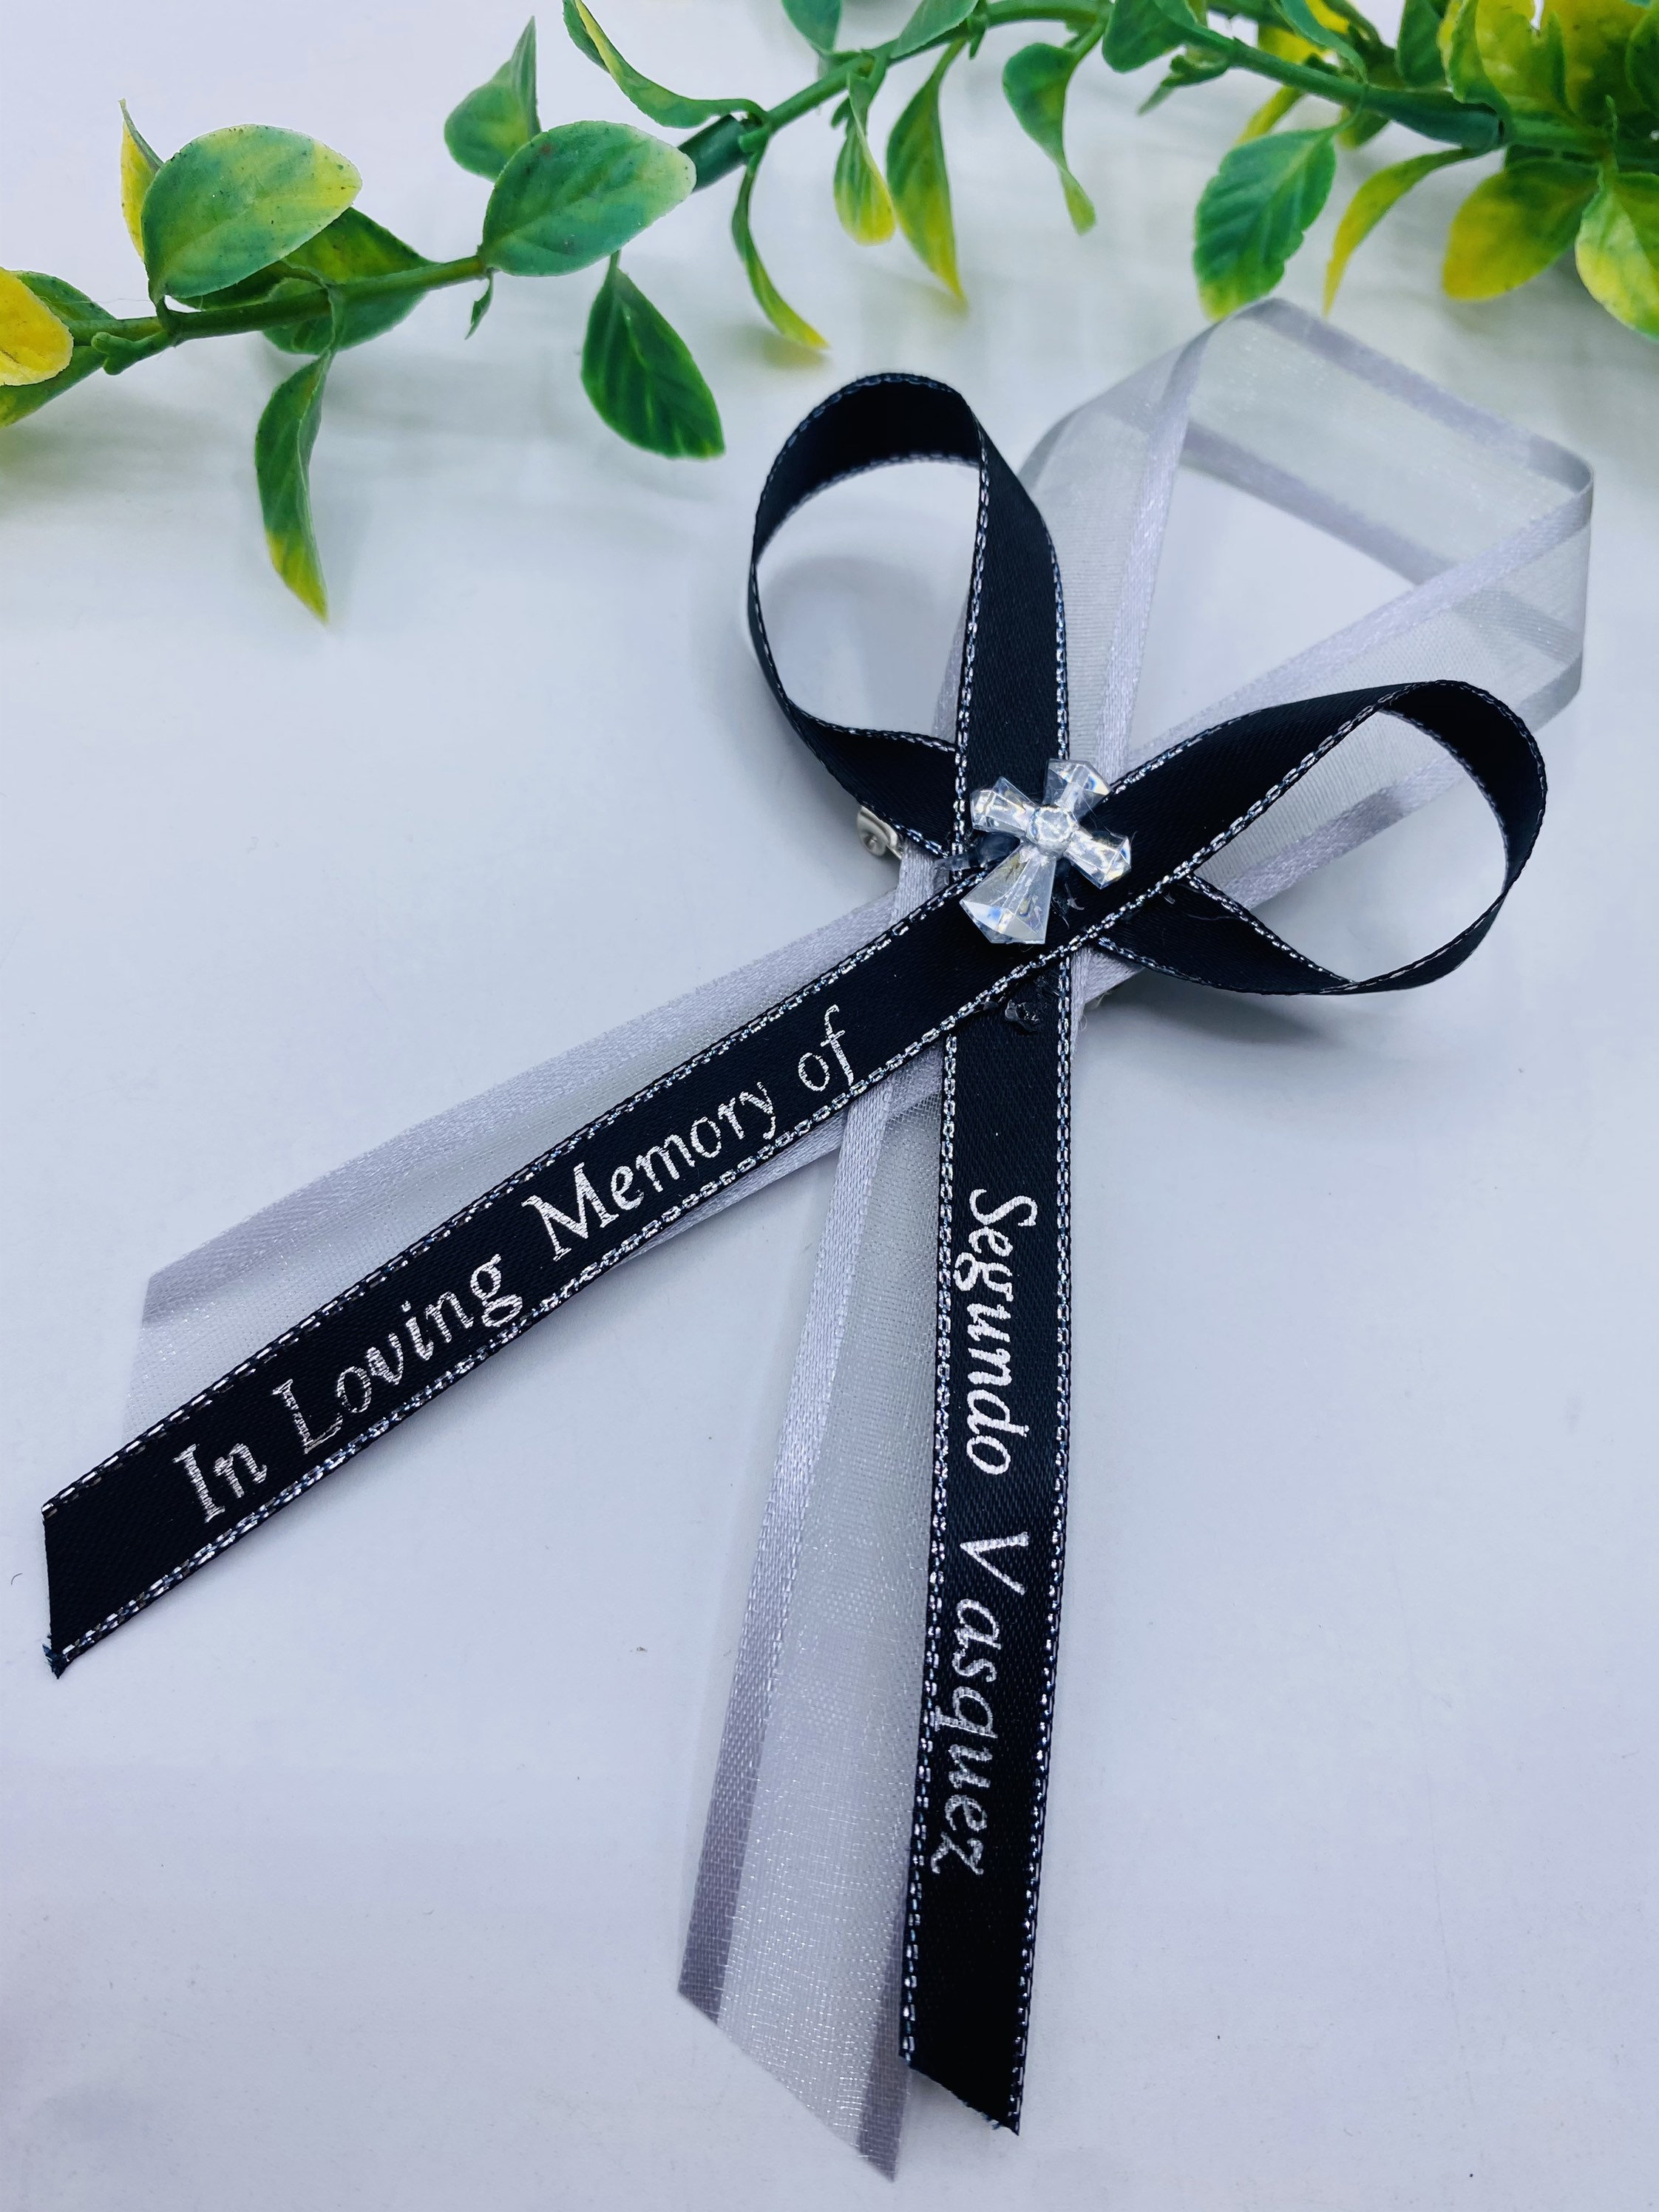 100,75,50,48,36pcs Funeral Favor/ Baby Shower Favor Gift/  Quinceanera/personalized Ribbons With Safety Pin Listones Grabados DOUBLE  RIBBONS -  Hong Kong